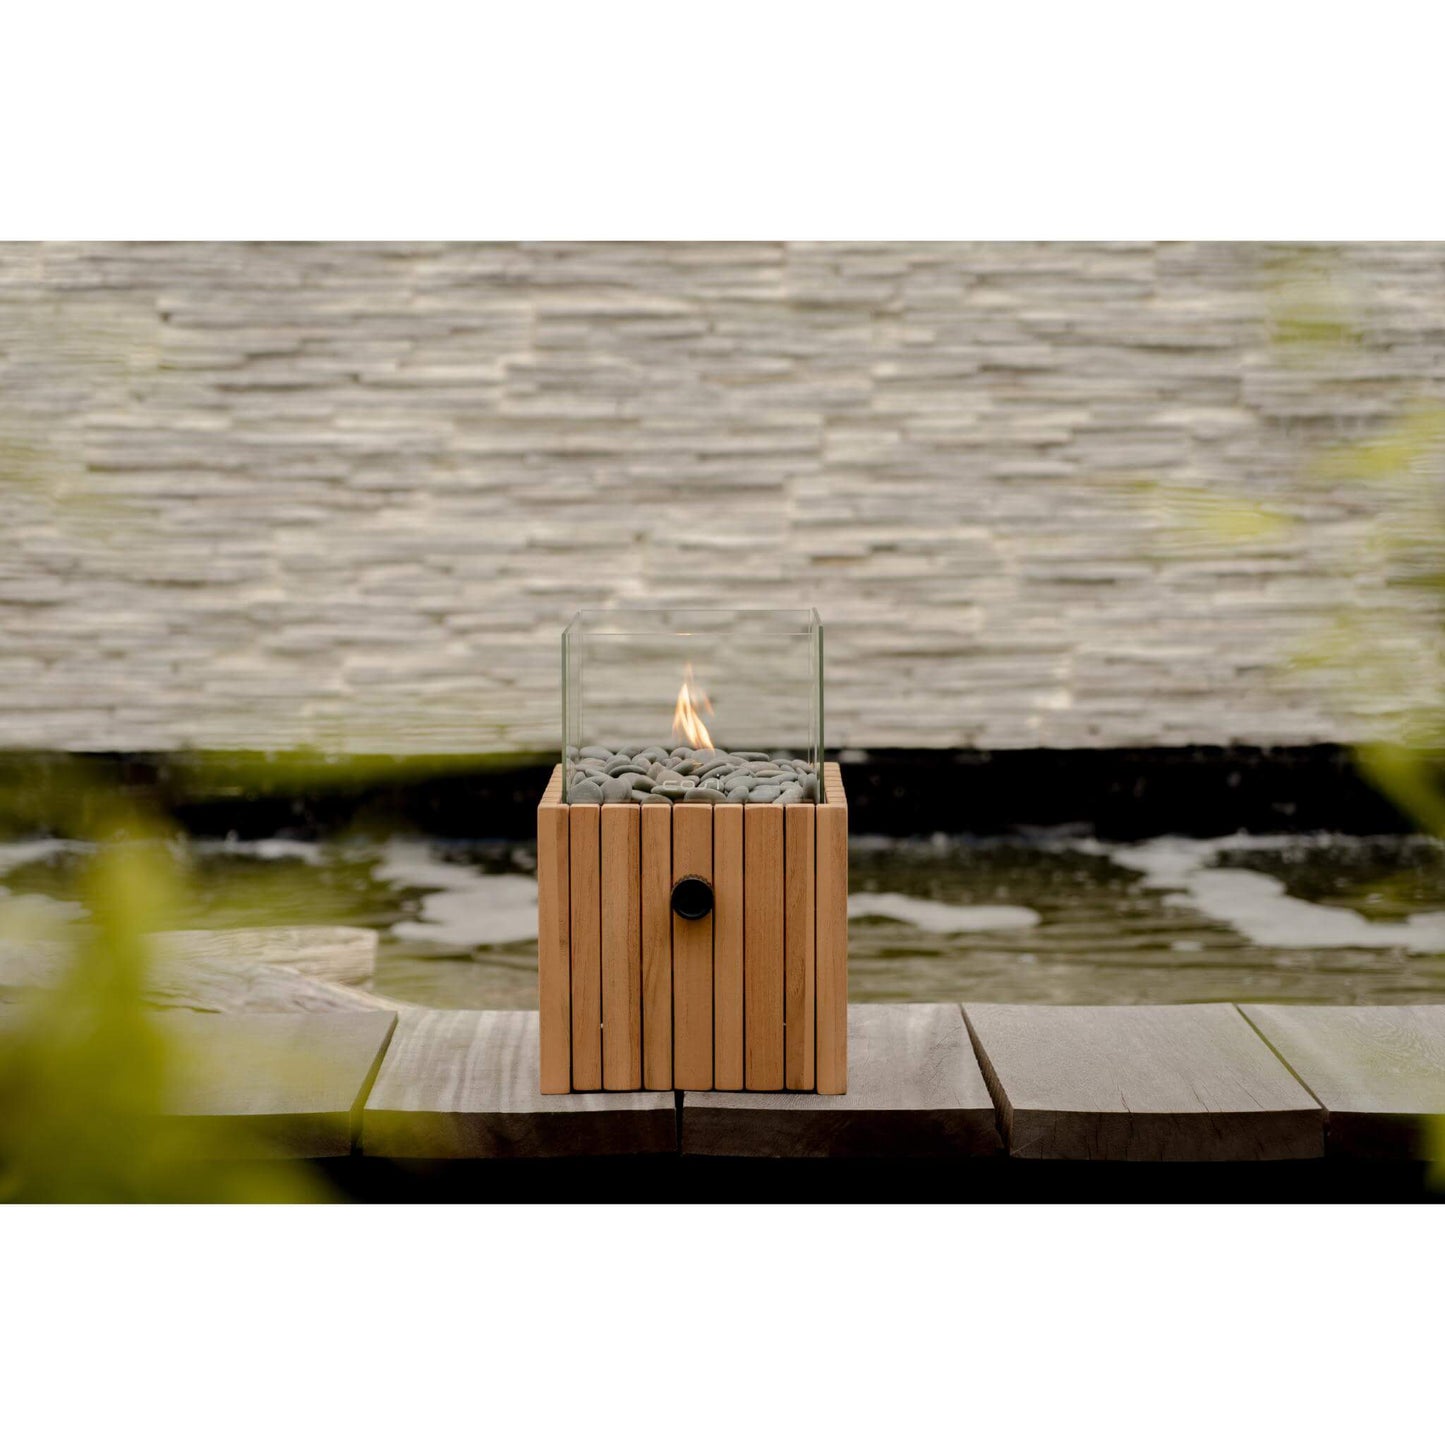 Cosiscoop Timber Square Tabletop Outdoor Gas Fire Lantern